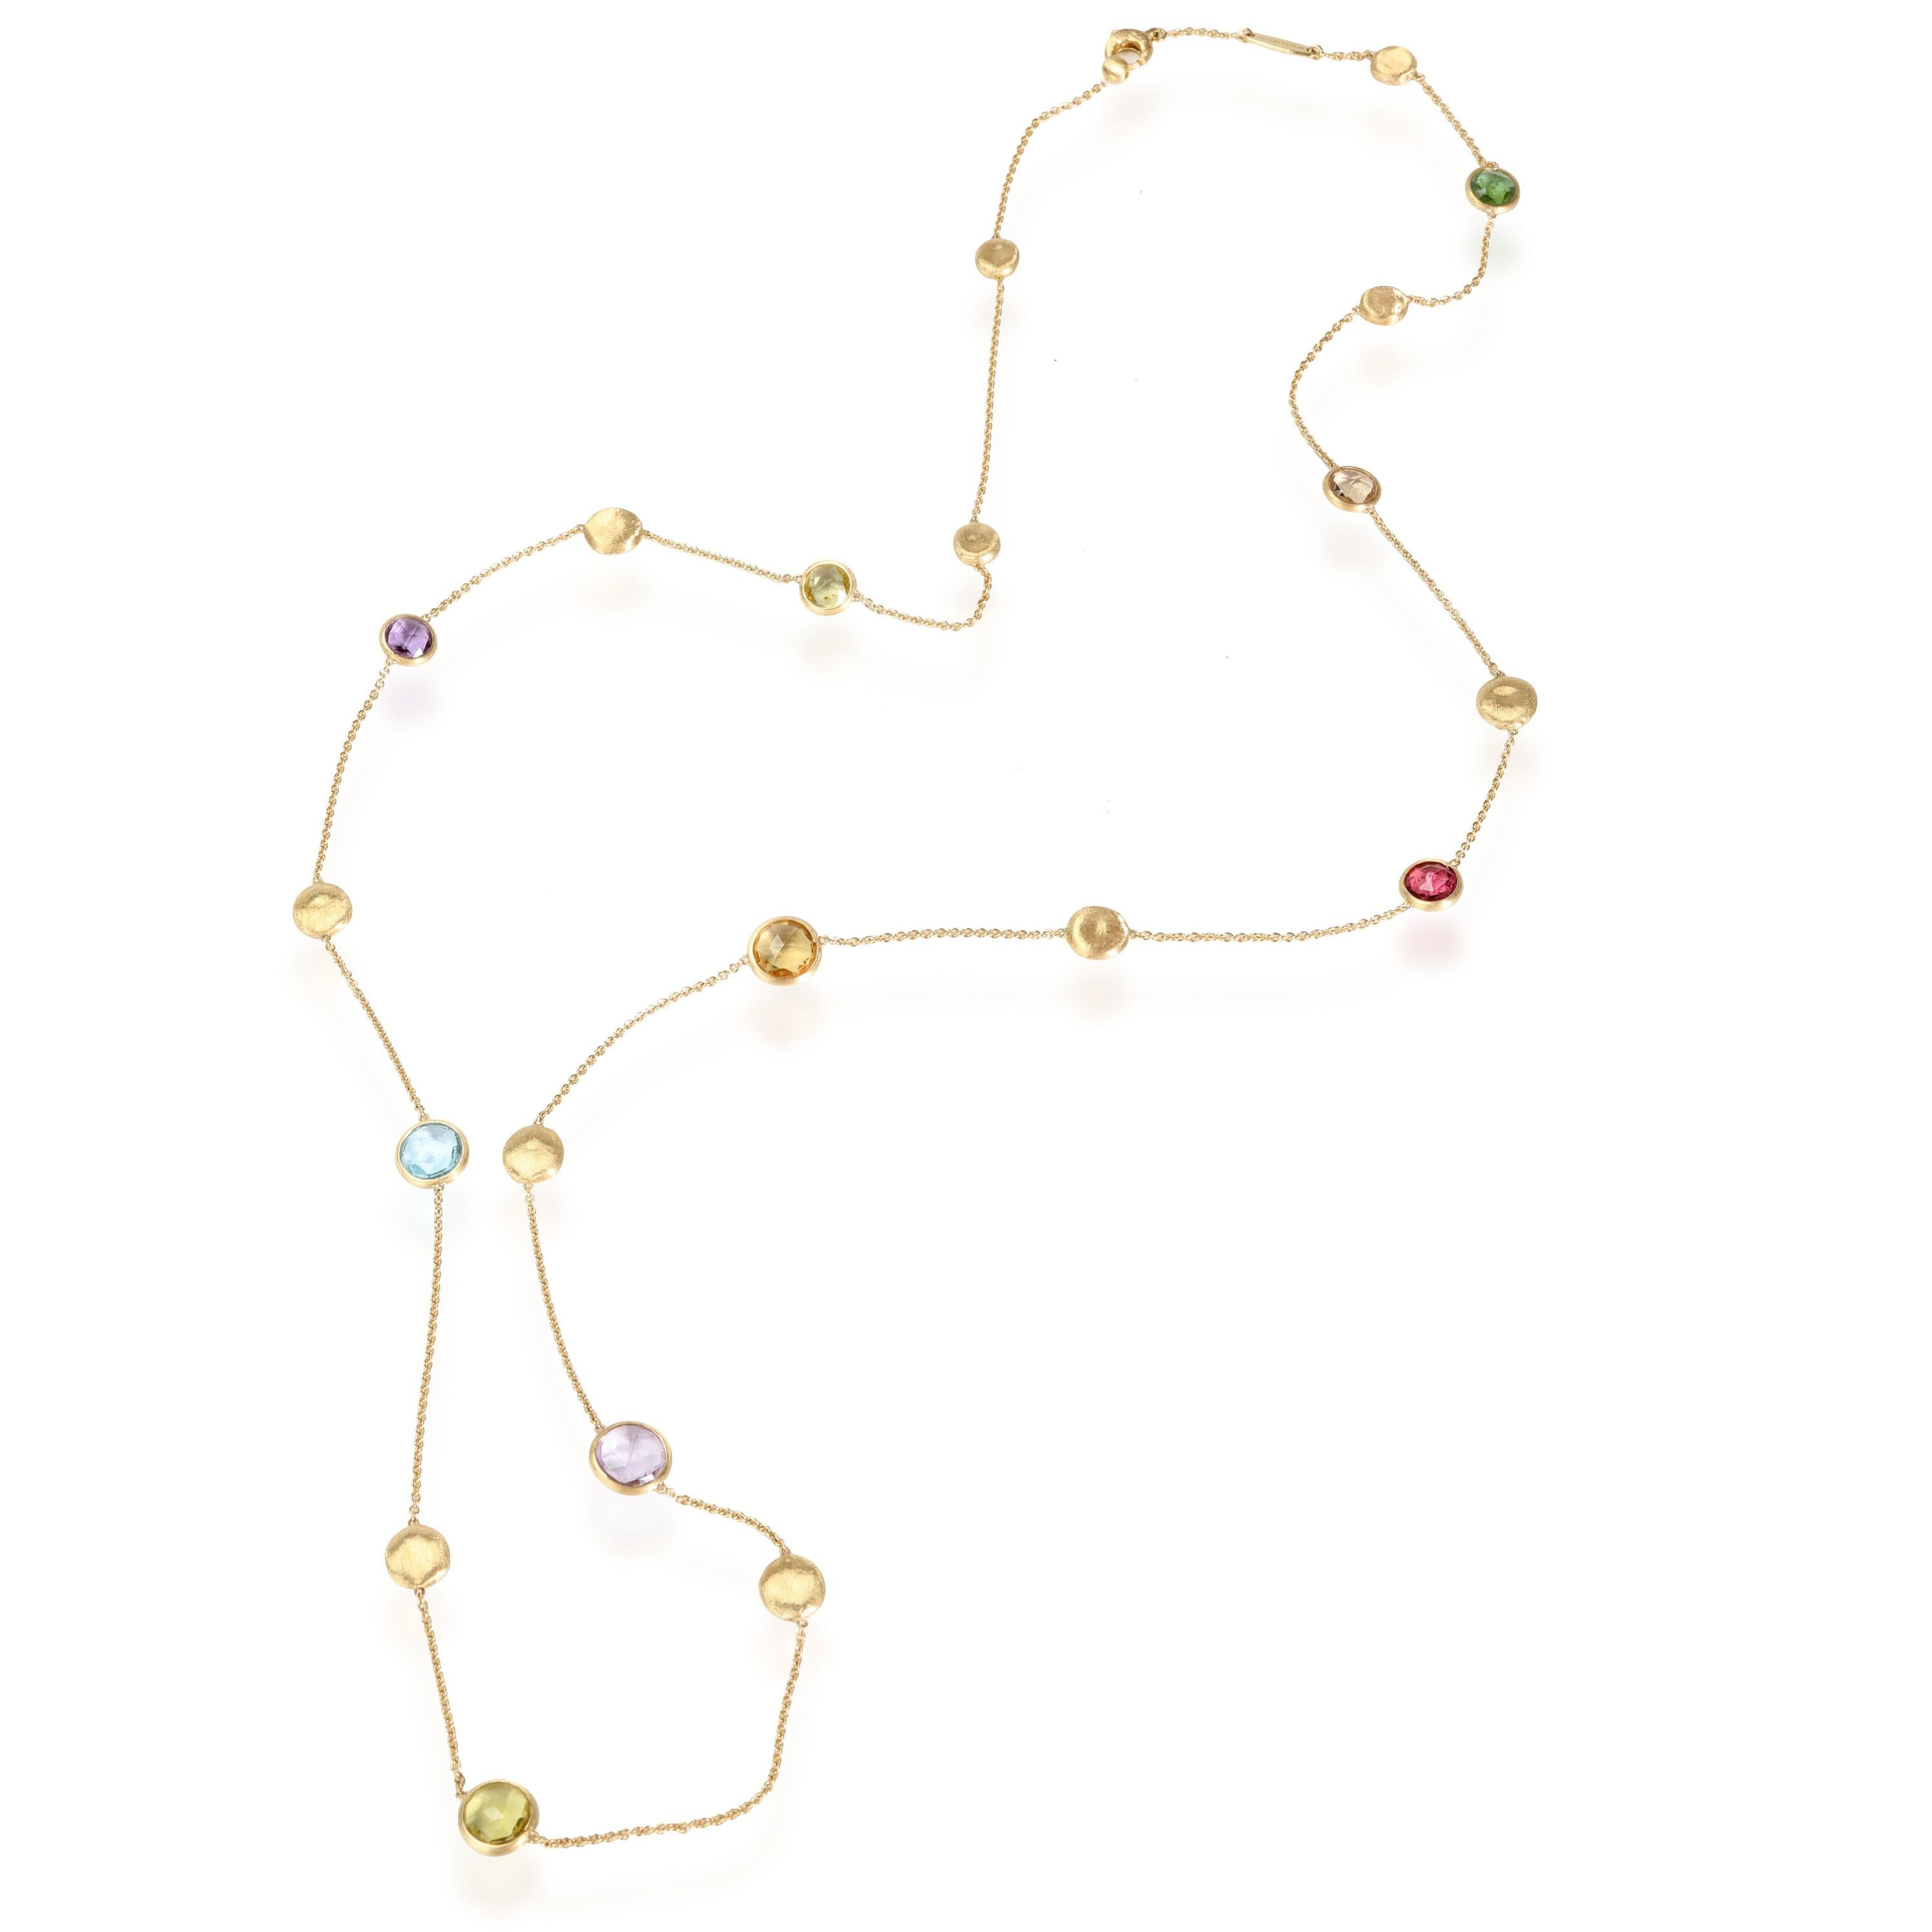 Marco Bicego Jaipur Station Necklace in 18k Yellow Gold











